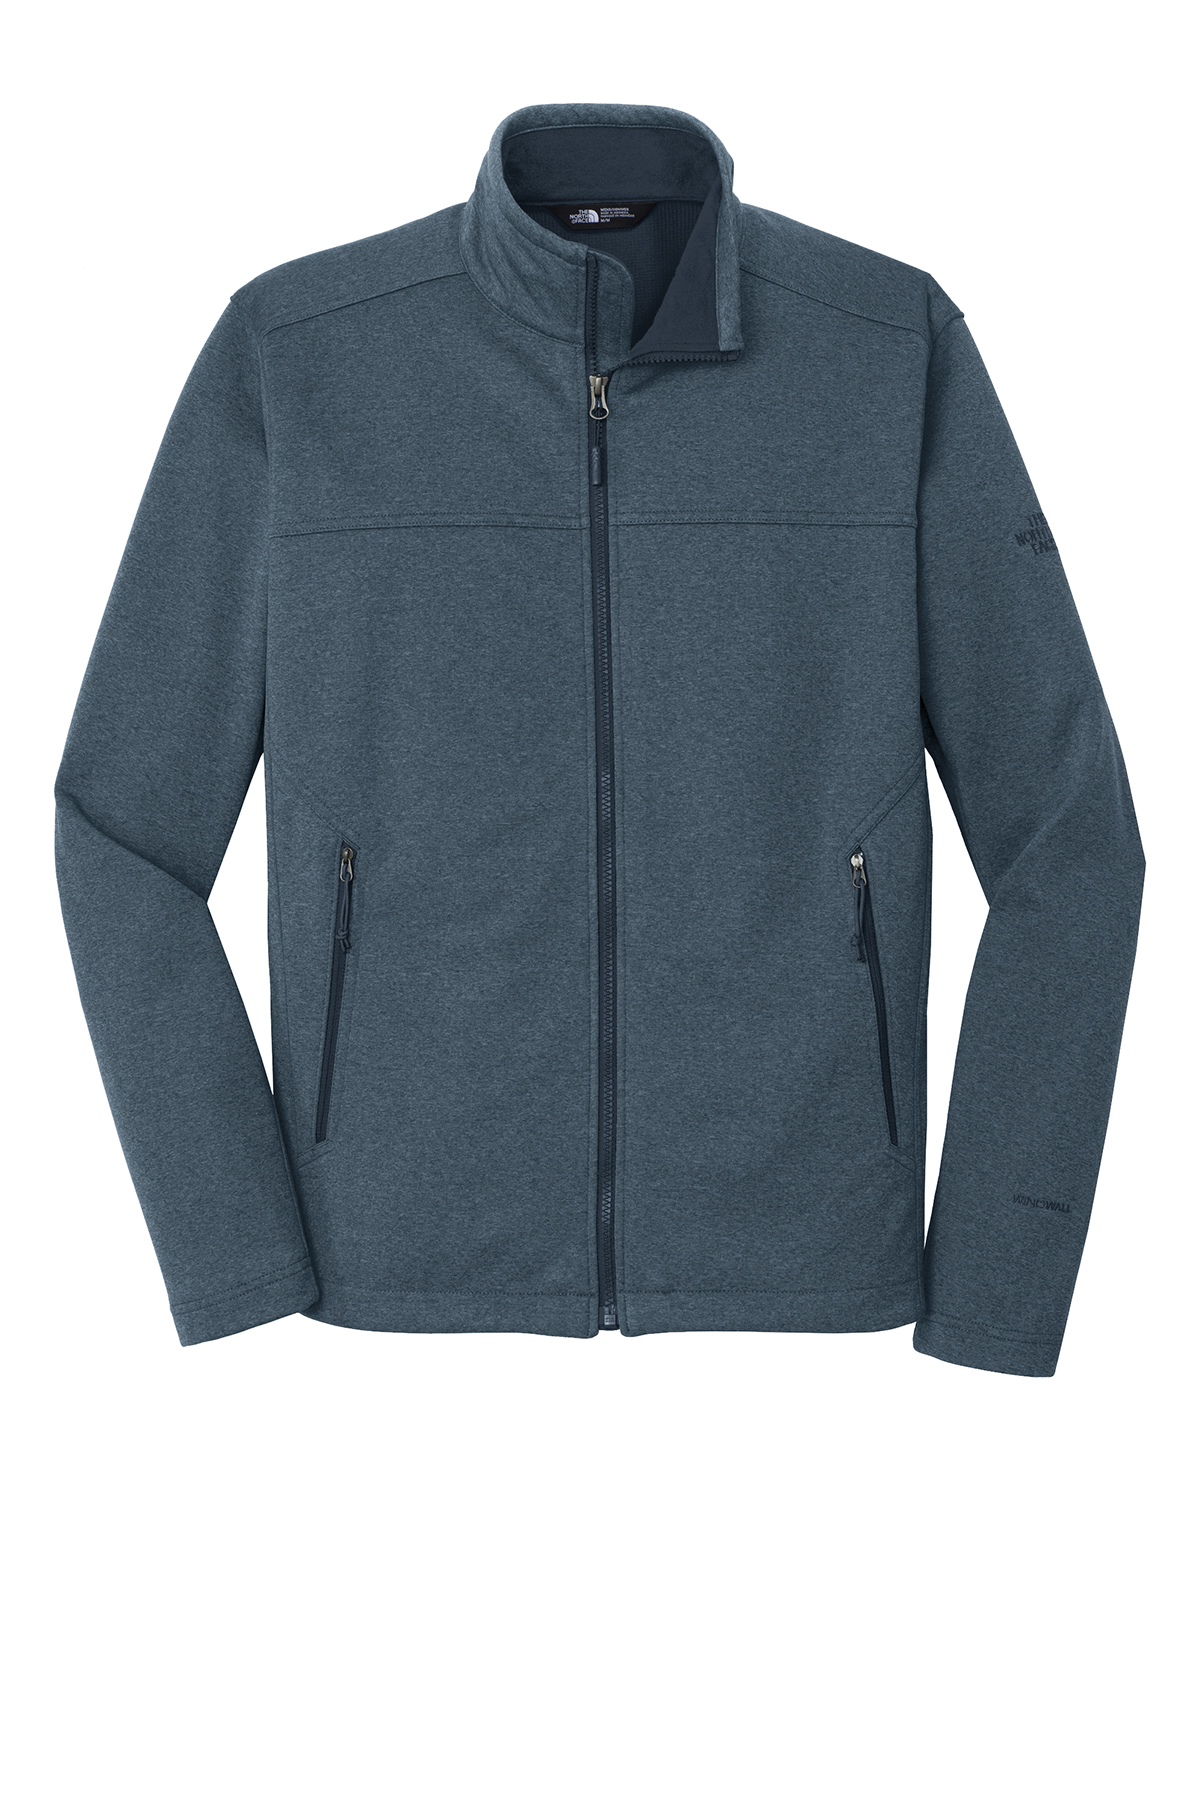 The North Face ® Ridgewall Soft Shell Jacket | Product | SanMar